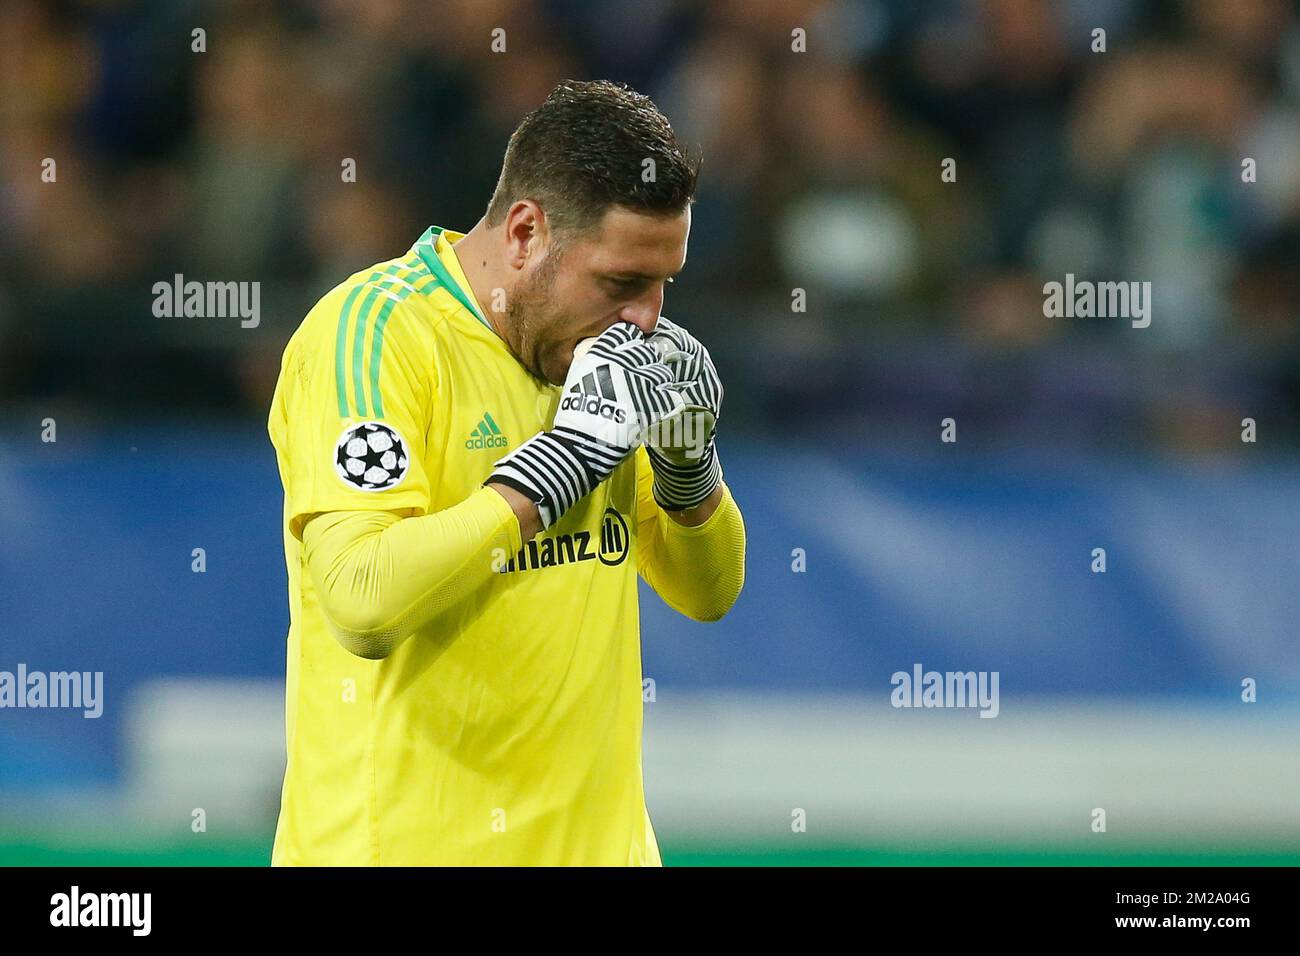 Anderlecht's goalkeeper Frank Boeckx looks dejected during the second game in the group stage (Group B) of the UEFA Champions League competition between Belgian soccer team RSC Anderlecht and Scottish Celtic FC, Wednesday 27 September 2017 in Brussels. BELGA PHOTO BRUNO FAHY Stock Photo